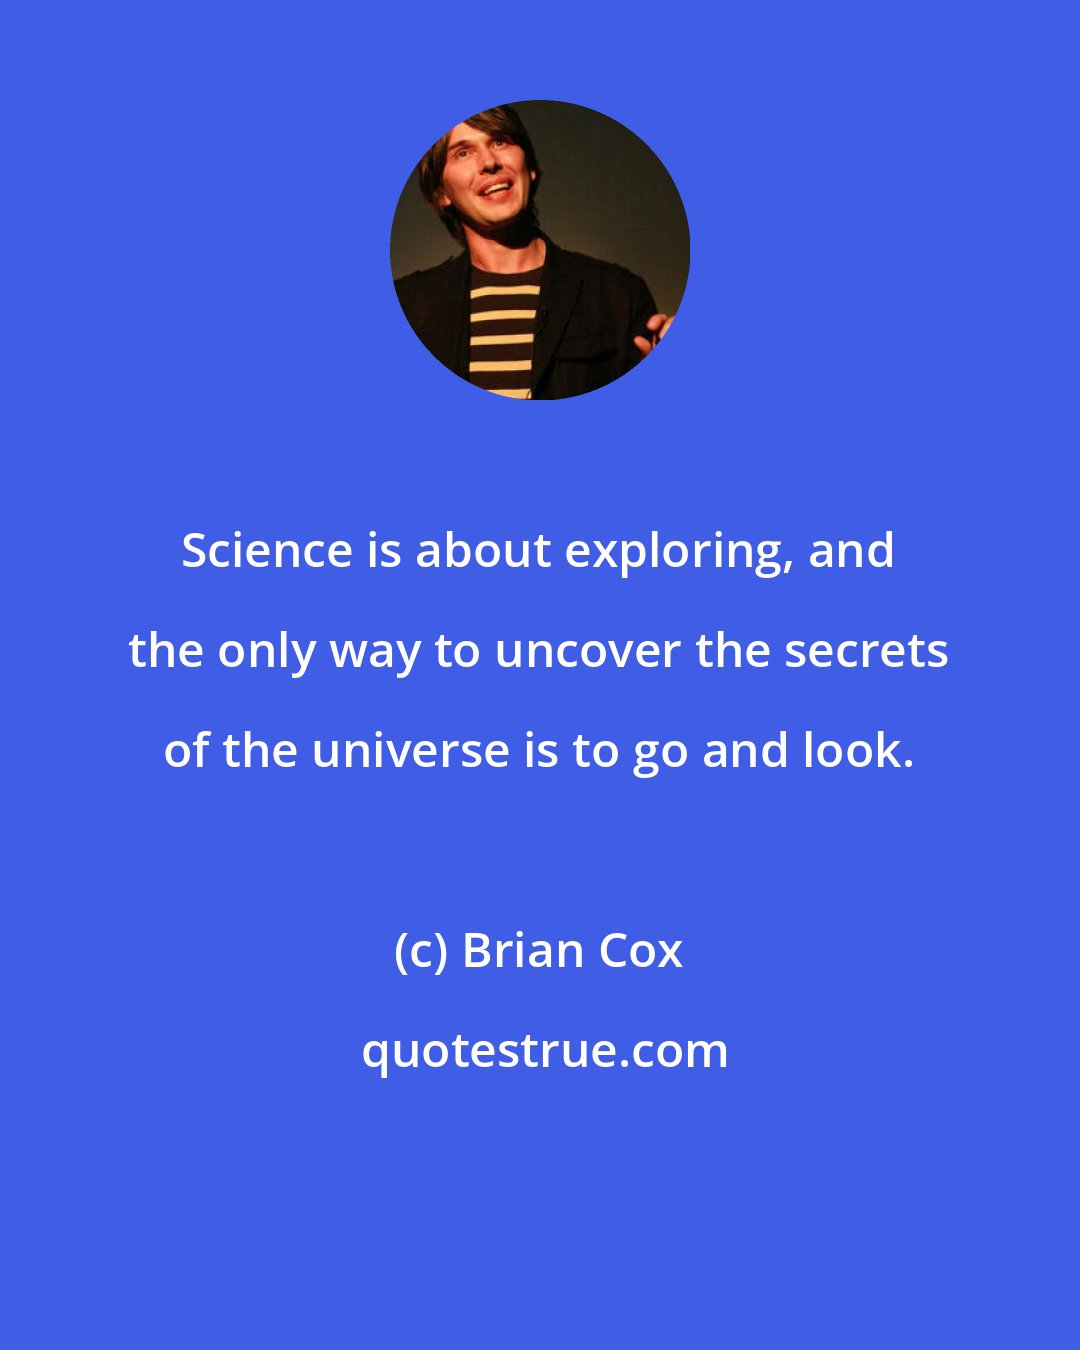 Brian Cox: Science is about exploring, and the only way to uncover the secrets of the universe is to go and look.